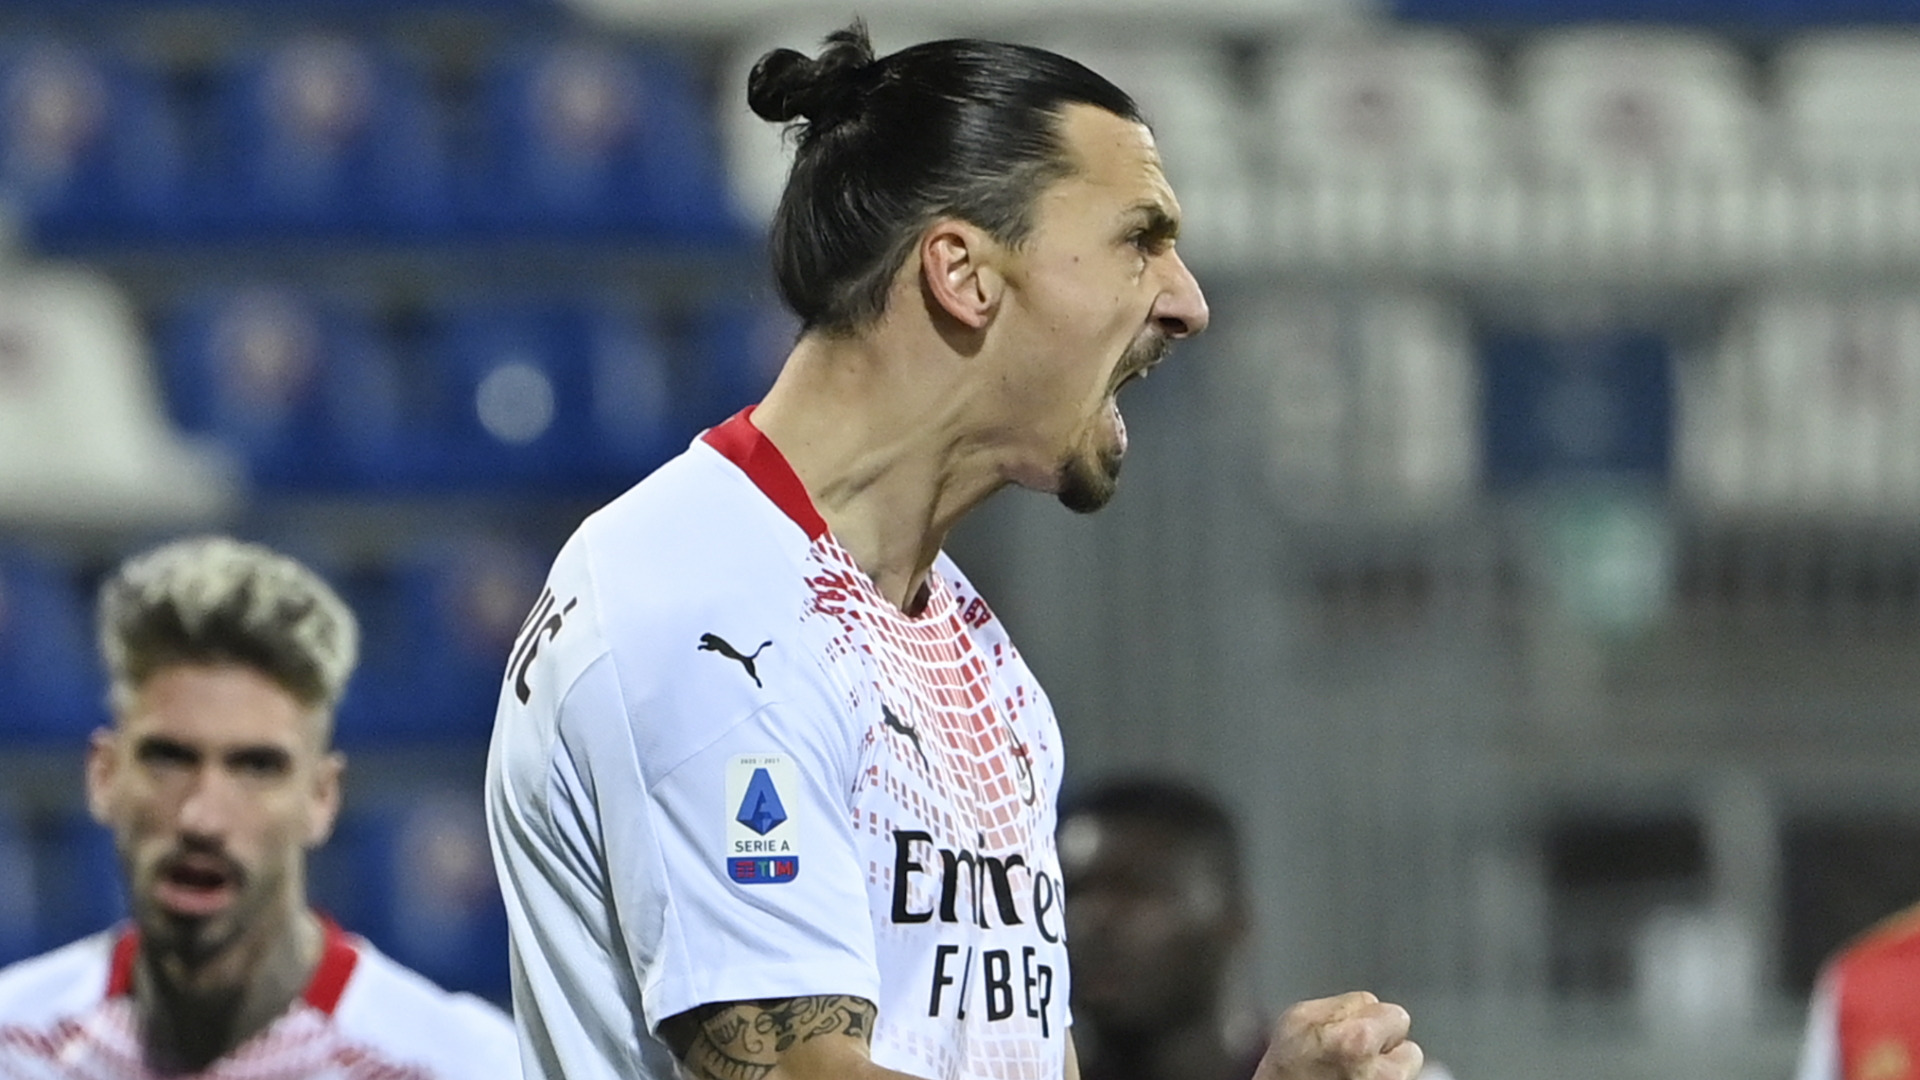 'I believe in Zlatan' - Ibrahimovic sets new personal best as Milan eye Scudetto run